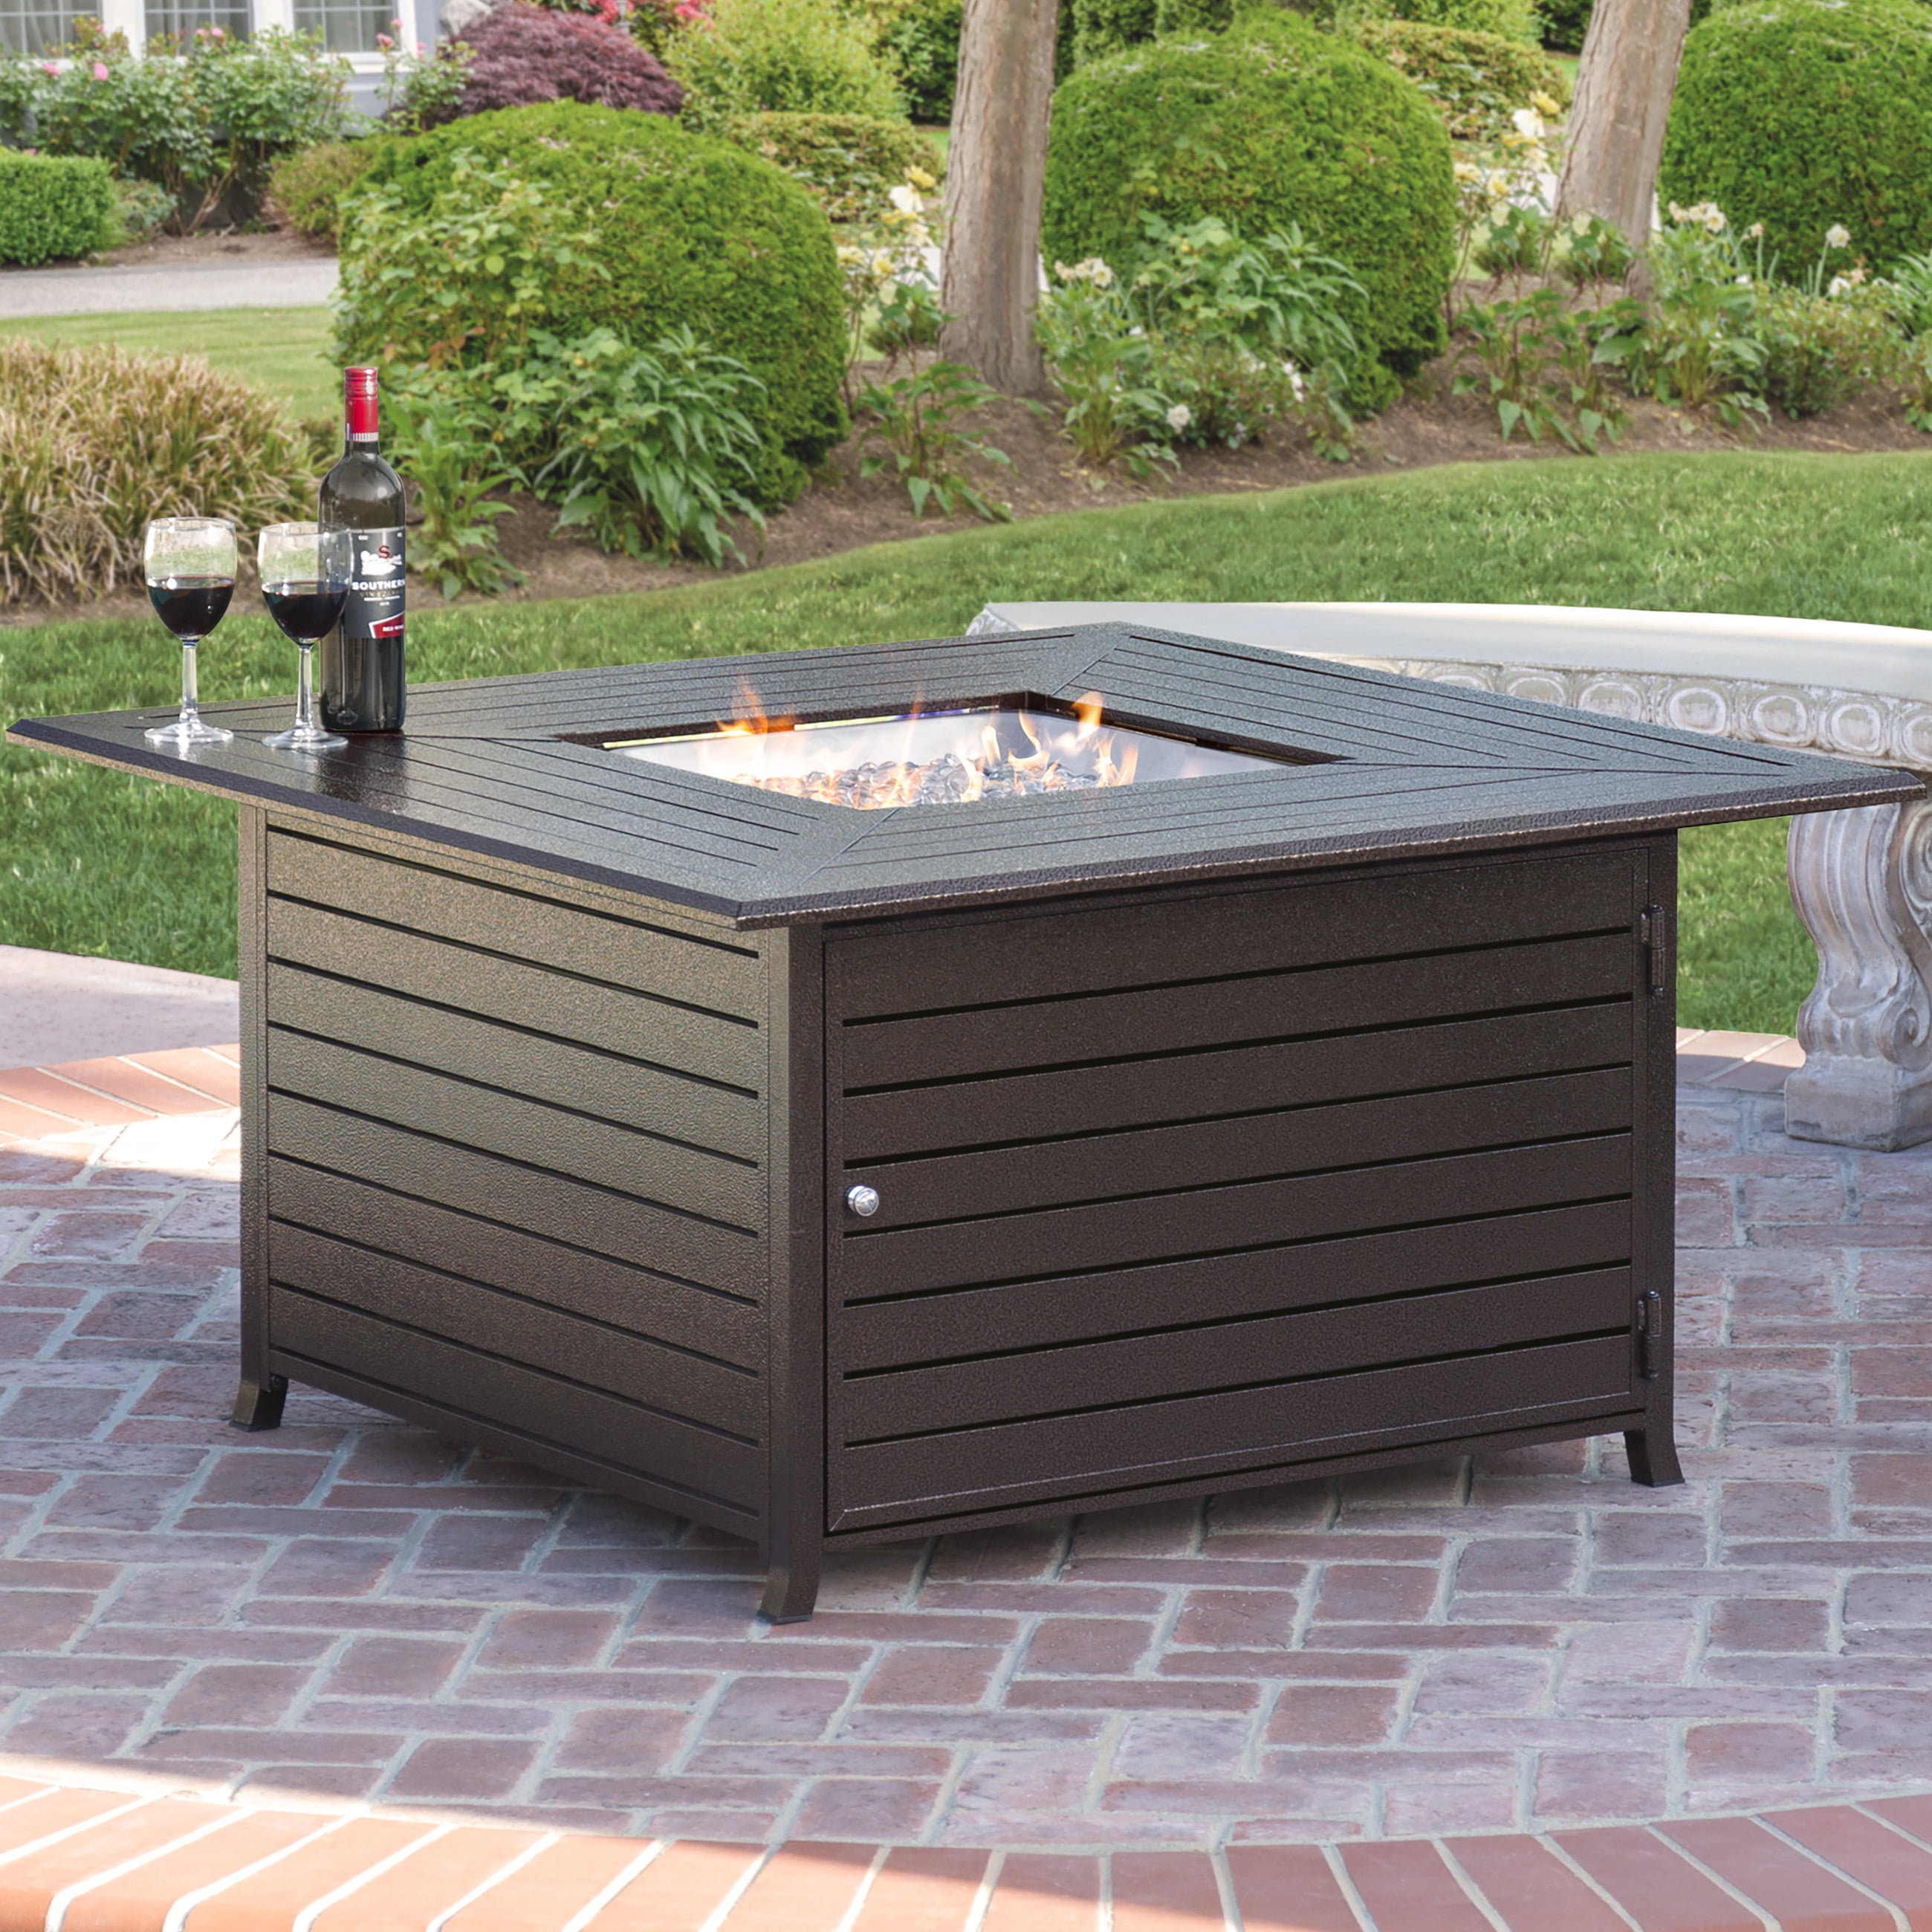 Best Choice Products Extruded Aluminum Gas Outdoor Fire Pit Table With